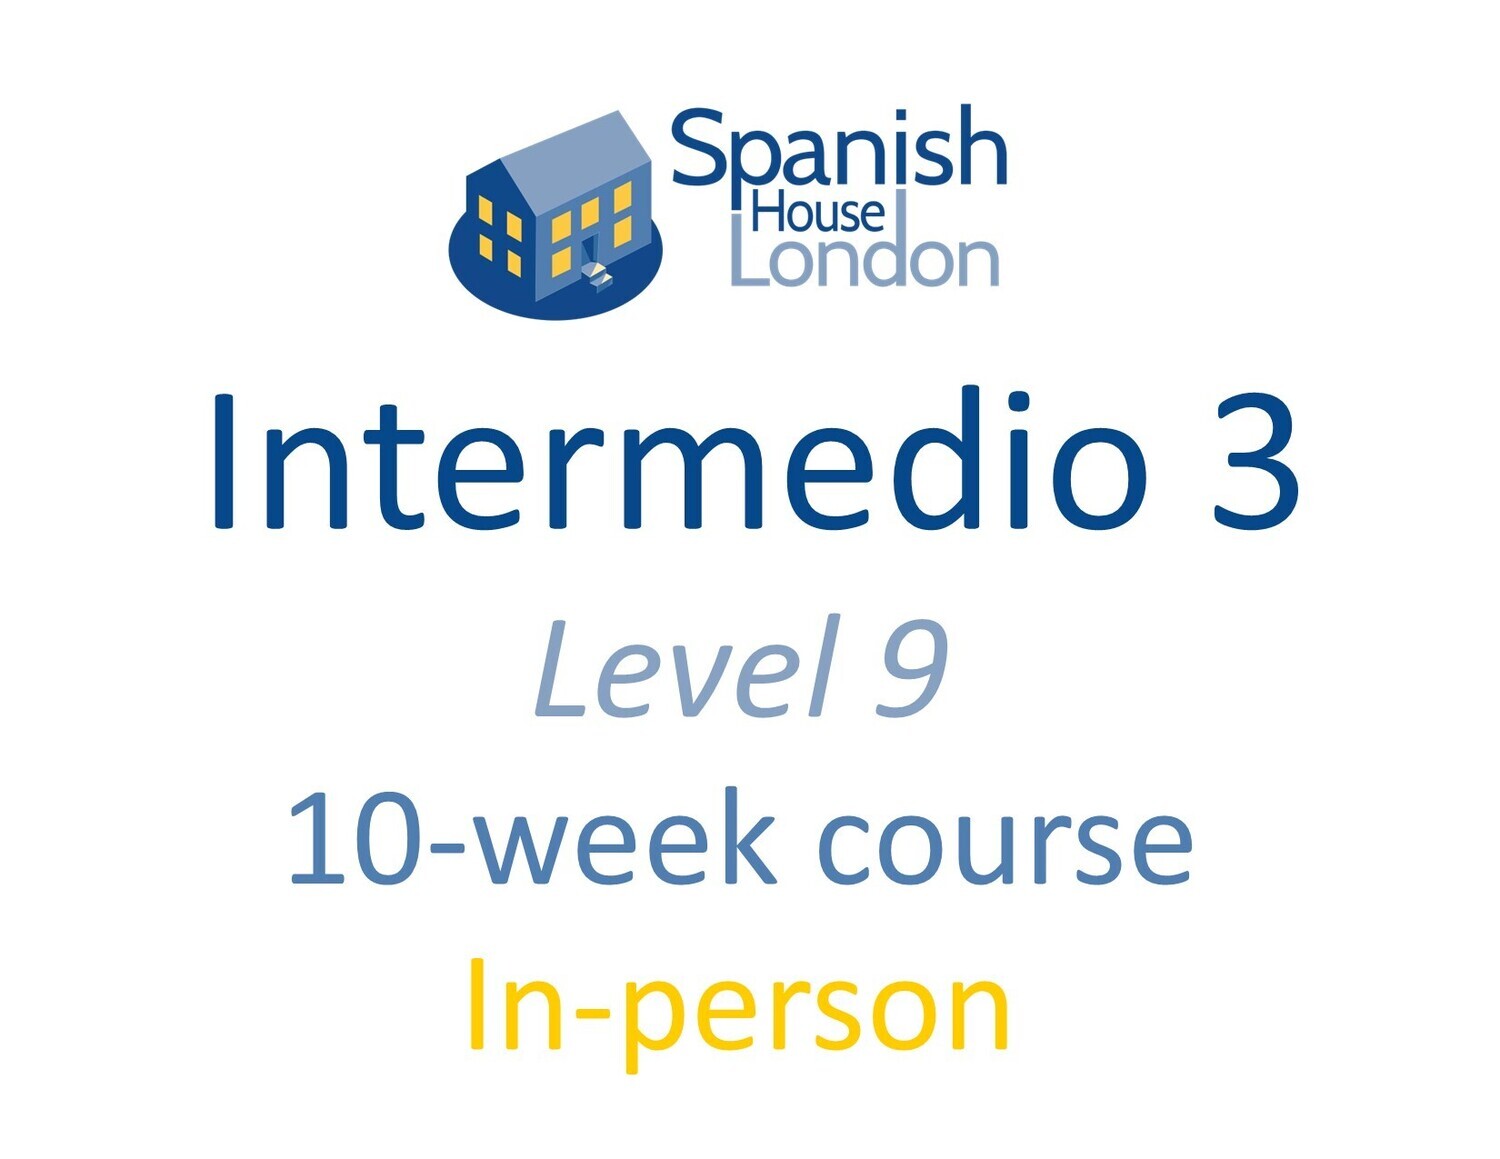 Intermedio 3 Course starting on 31st October at 7.30pm in Clapham North